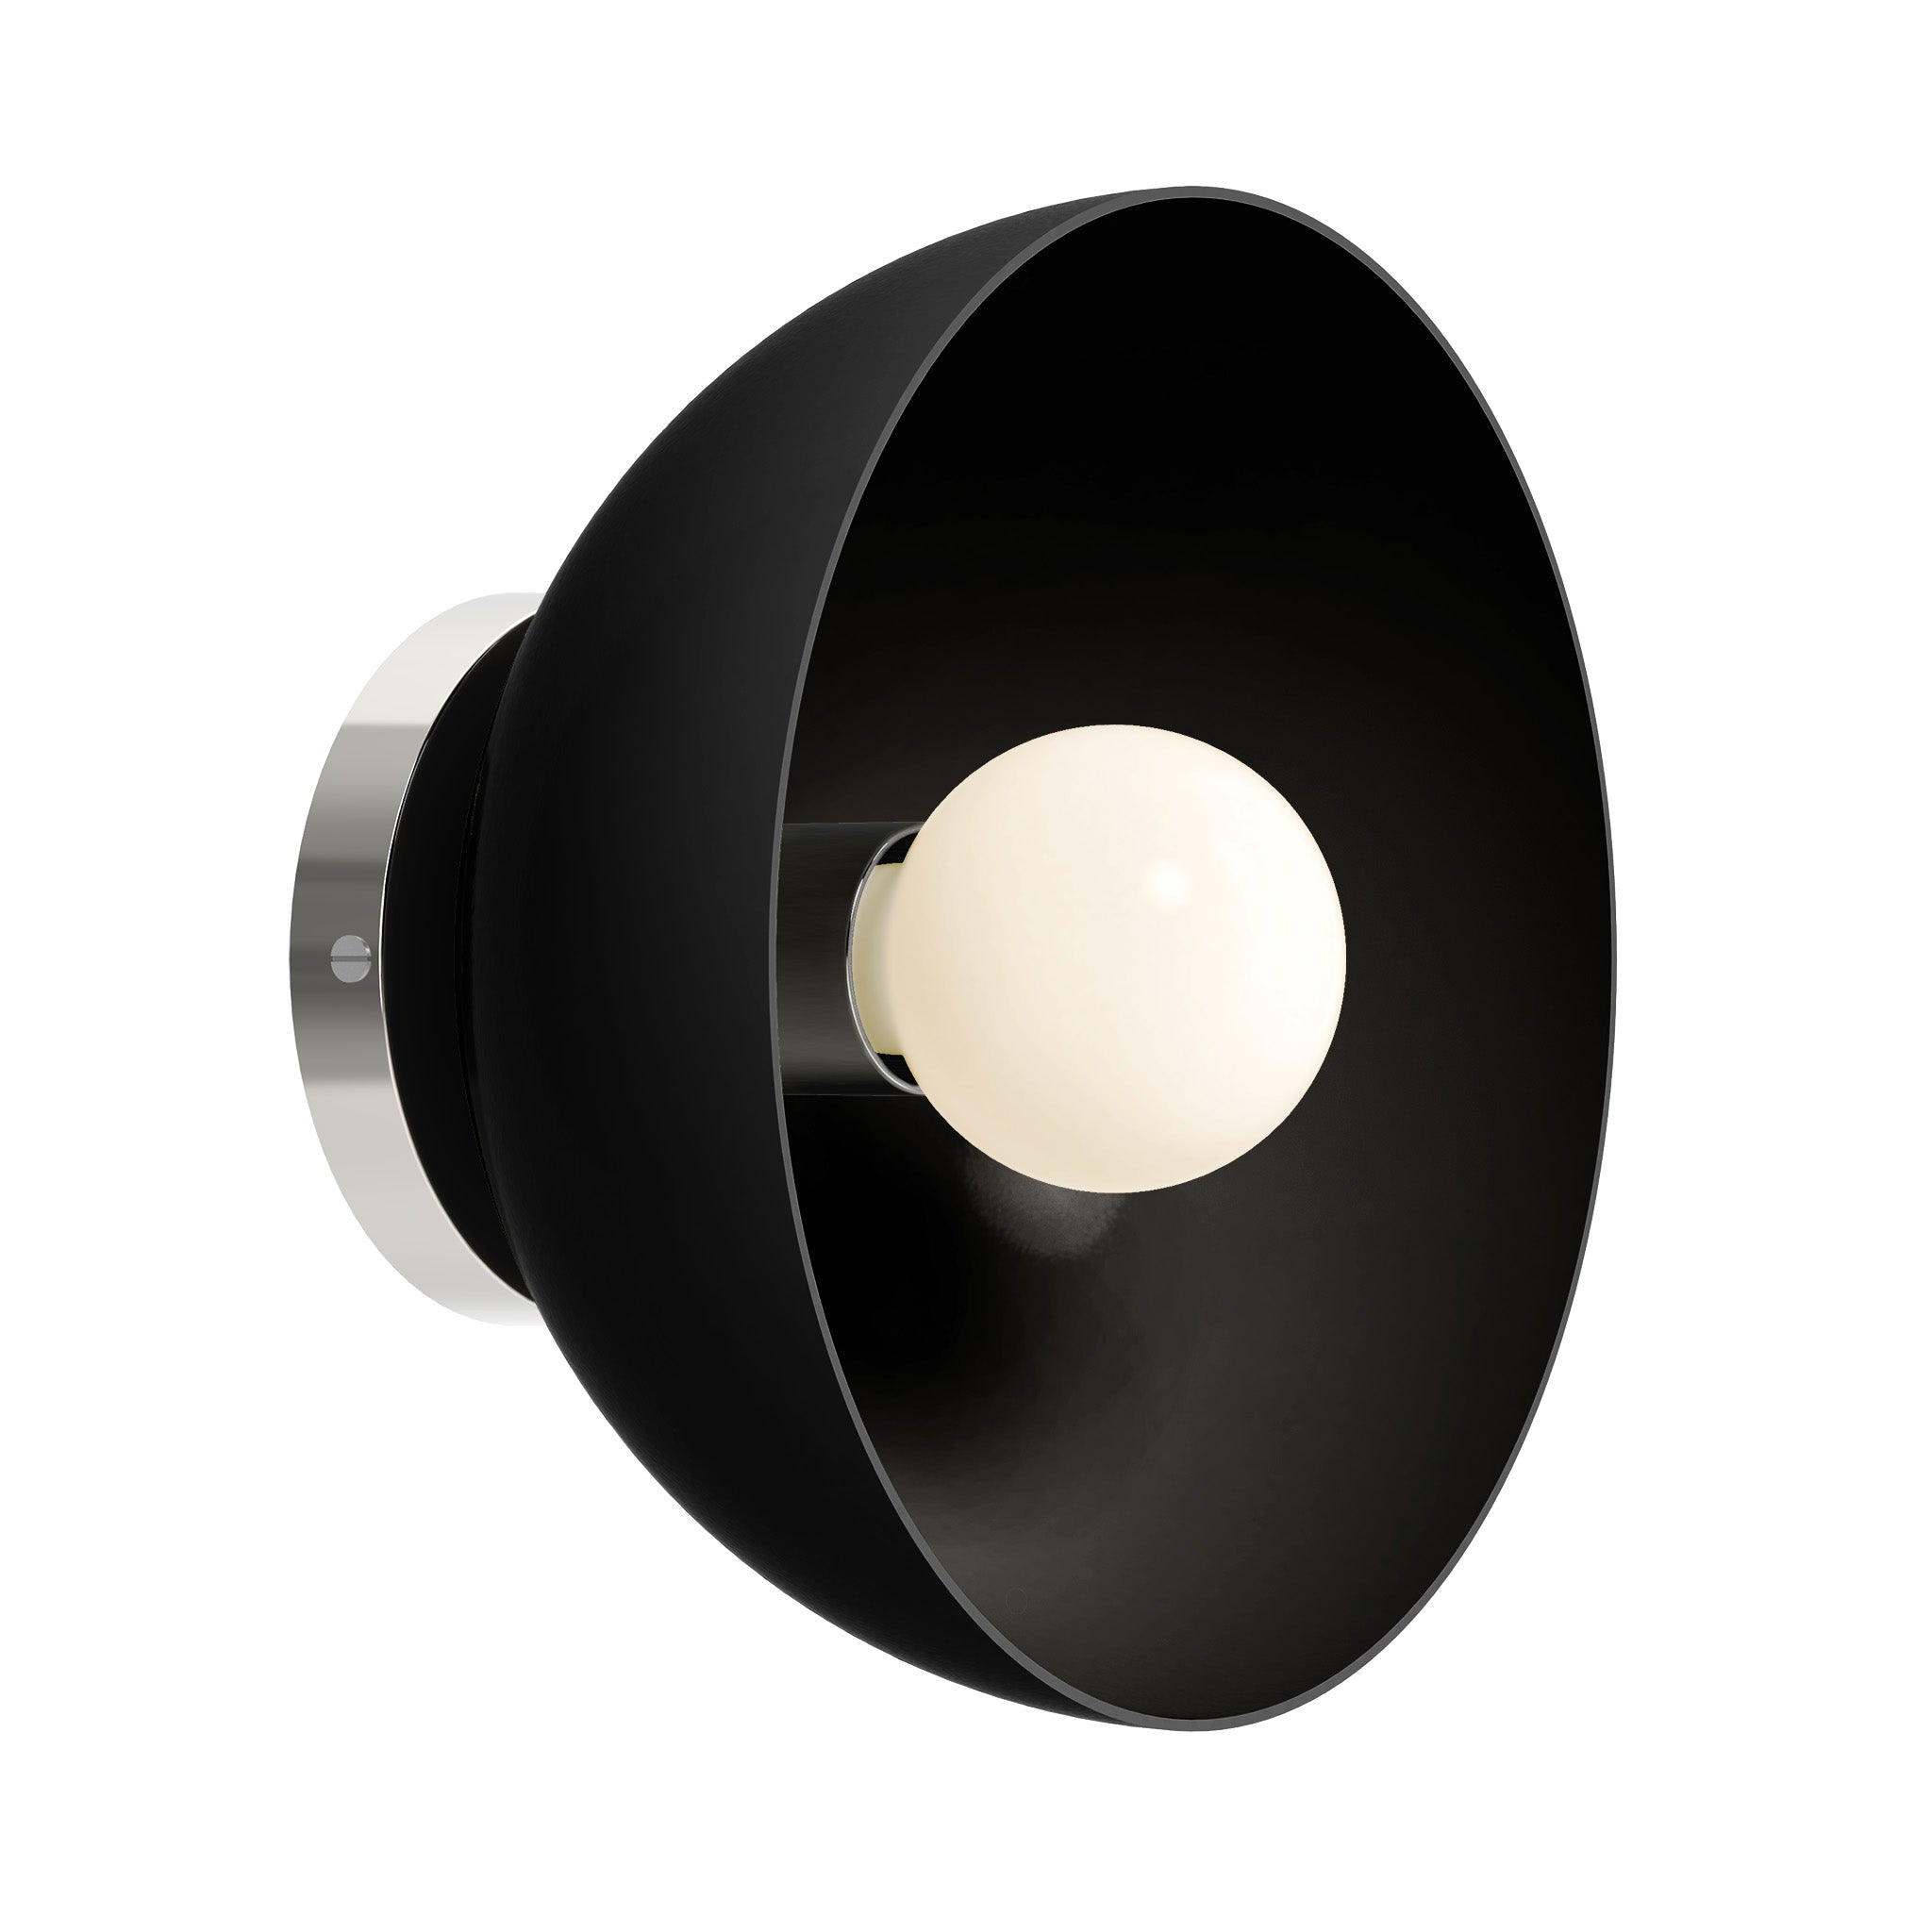 Nickel and black color hemi dome sconce 10" Dutton Brown lighting